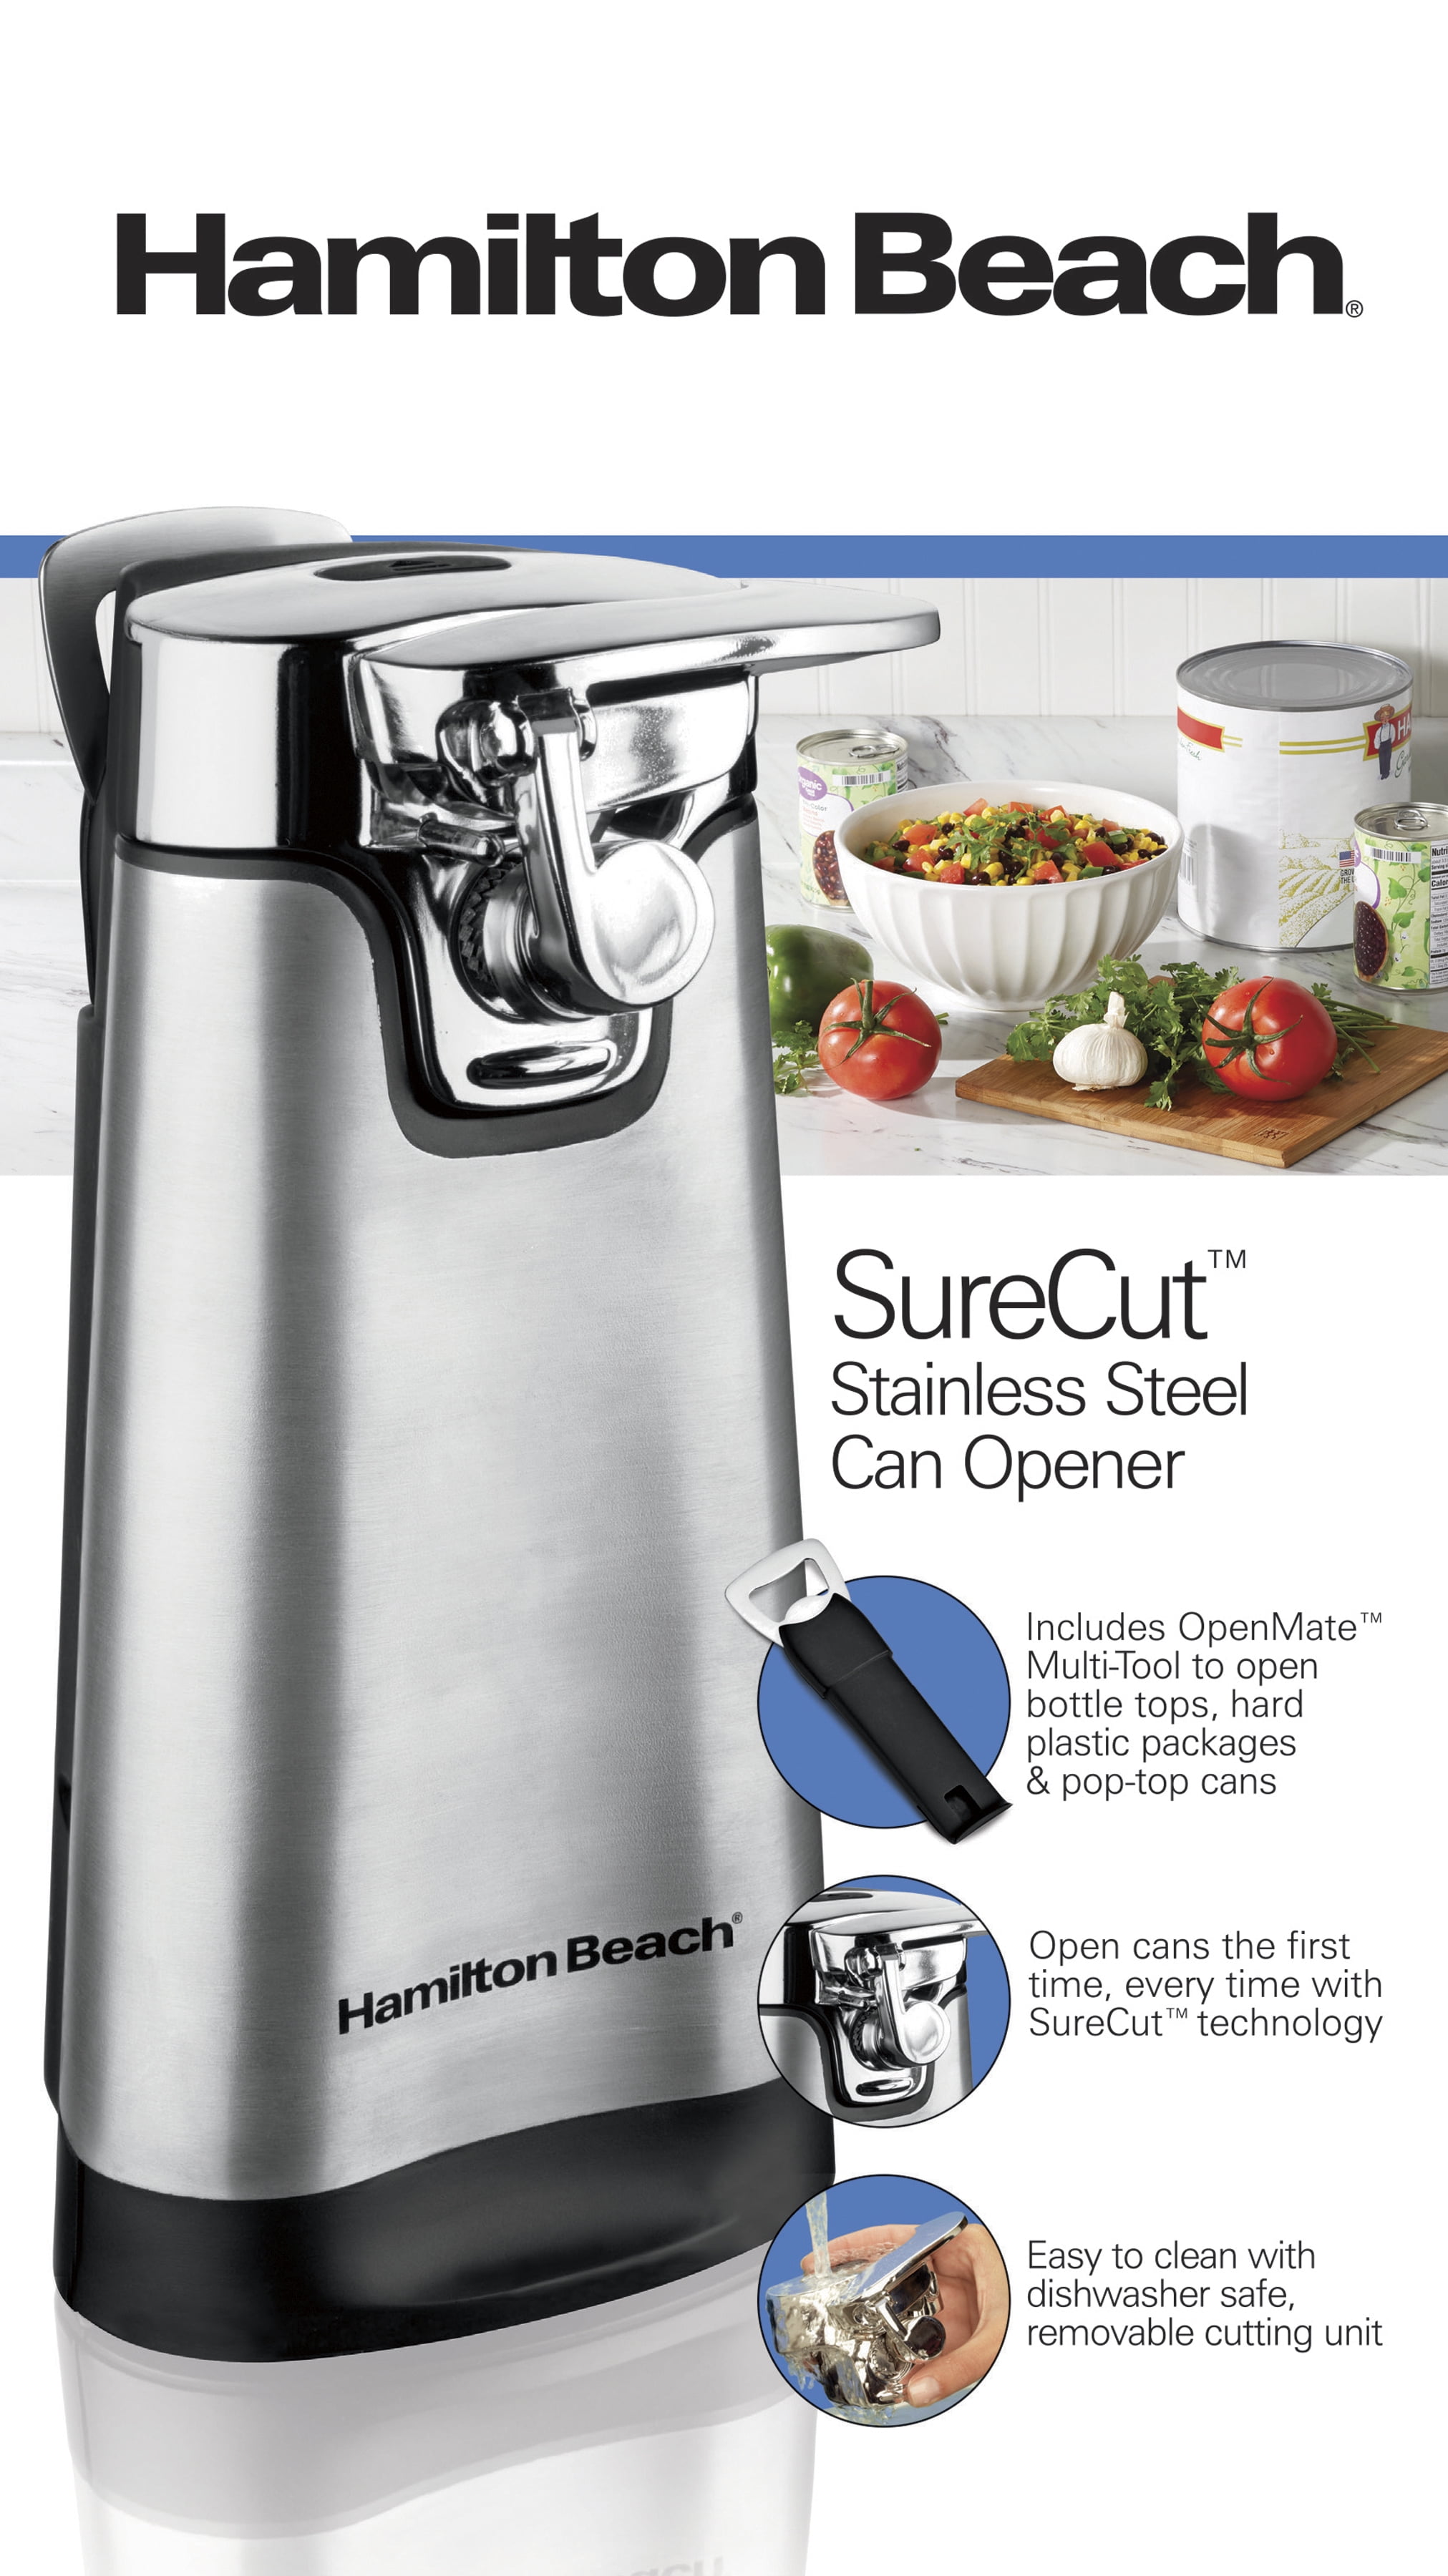 Hamilton Beach Sure Cut Stainless Steel Can Opener with Multi-Tool